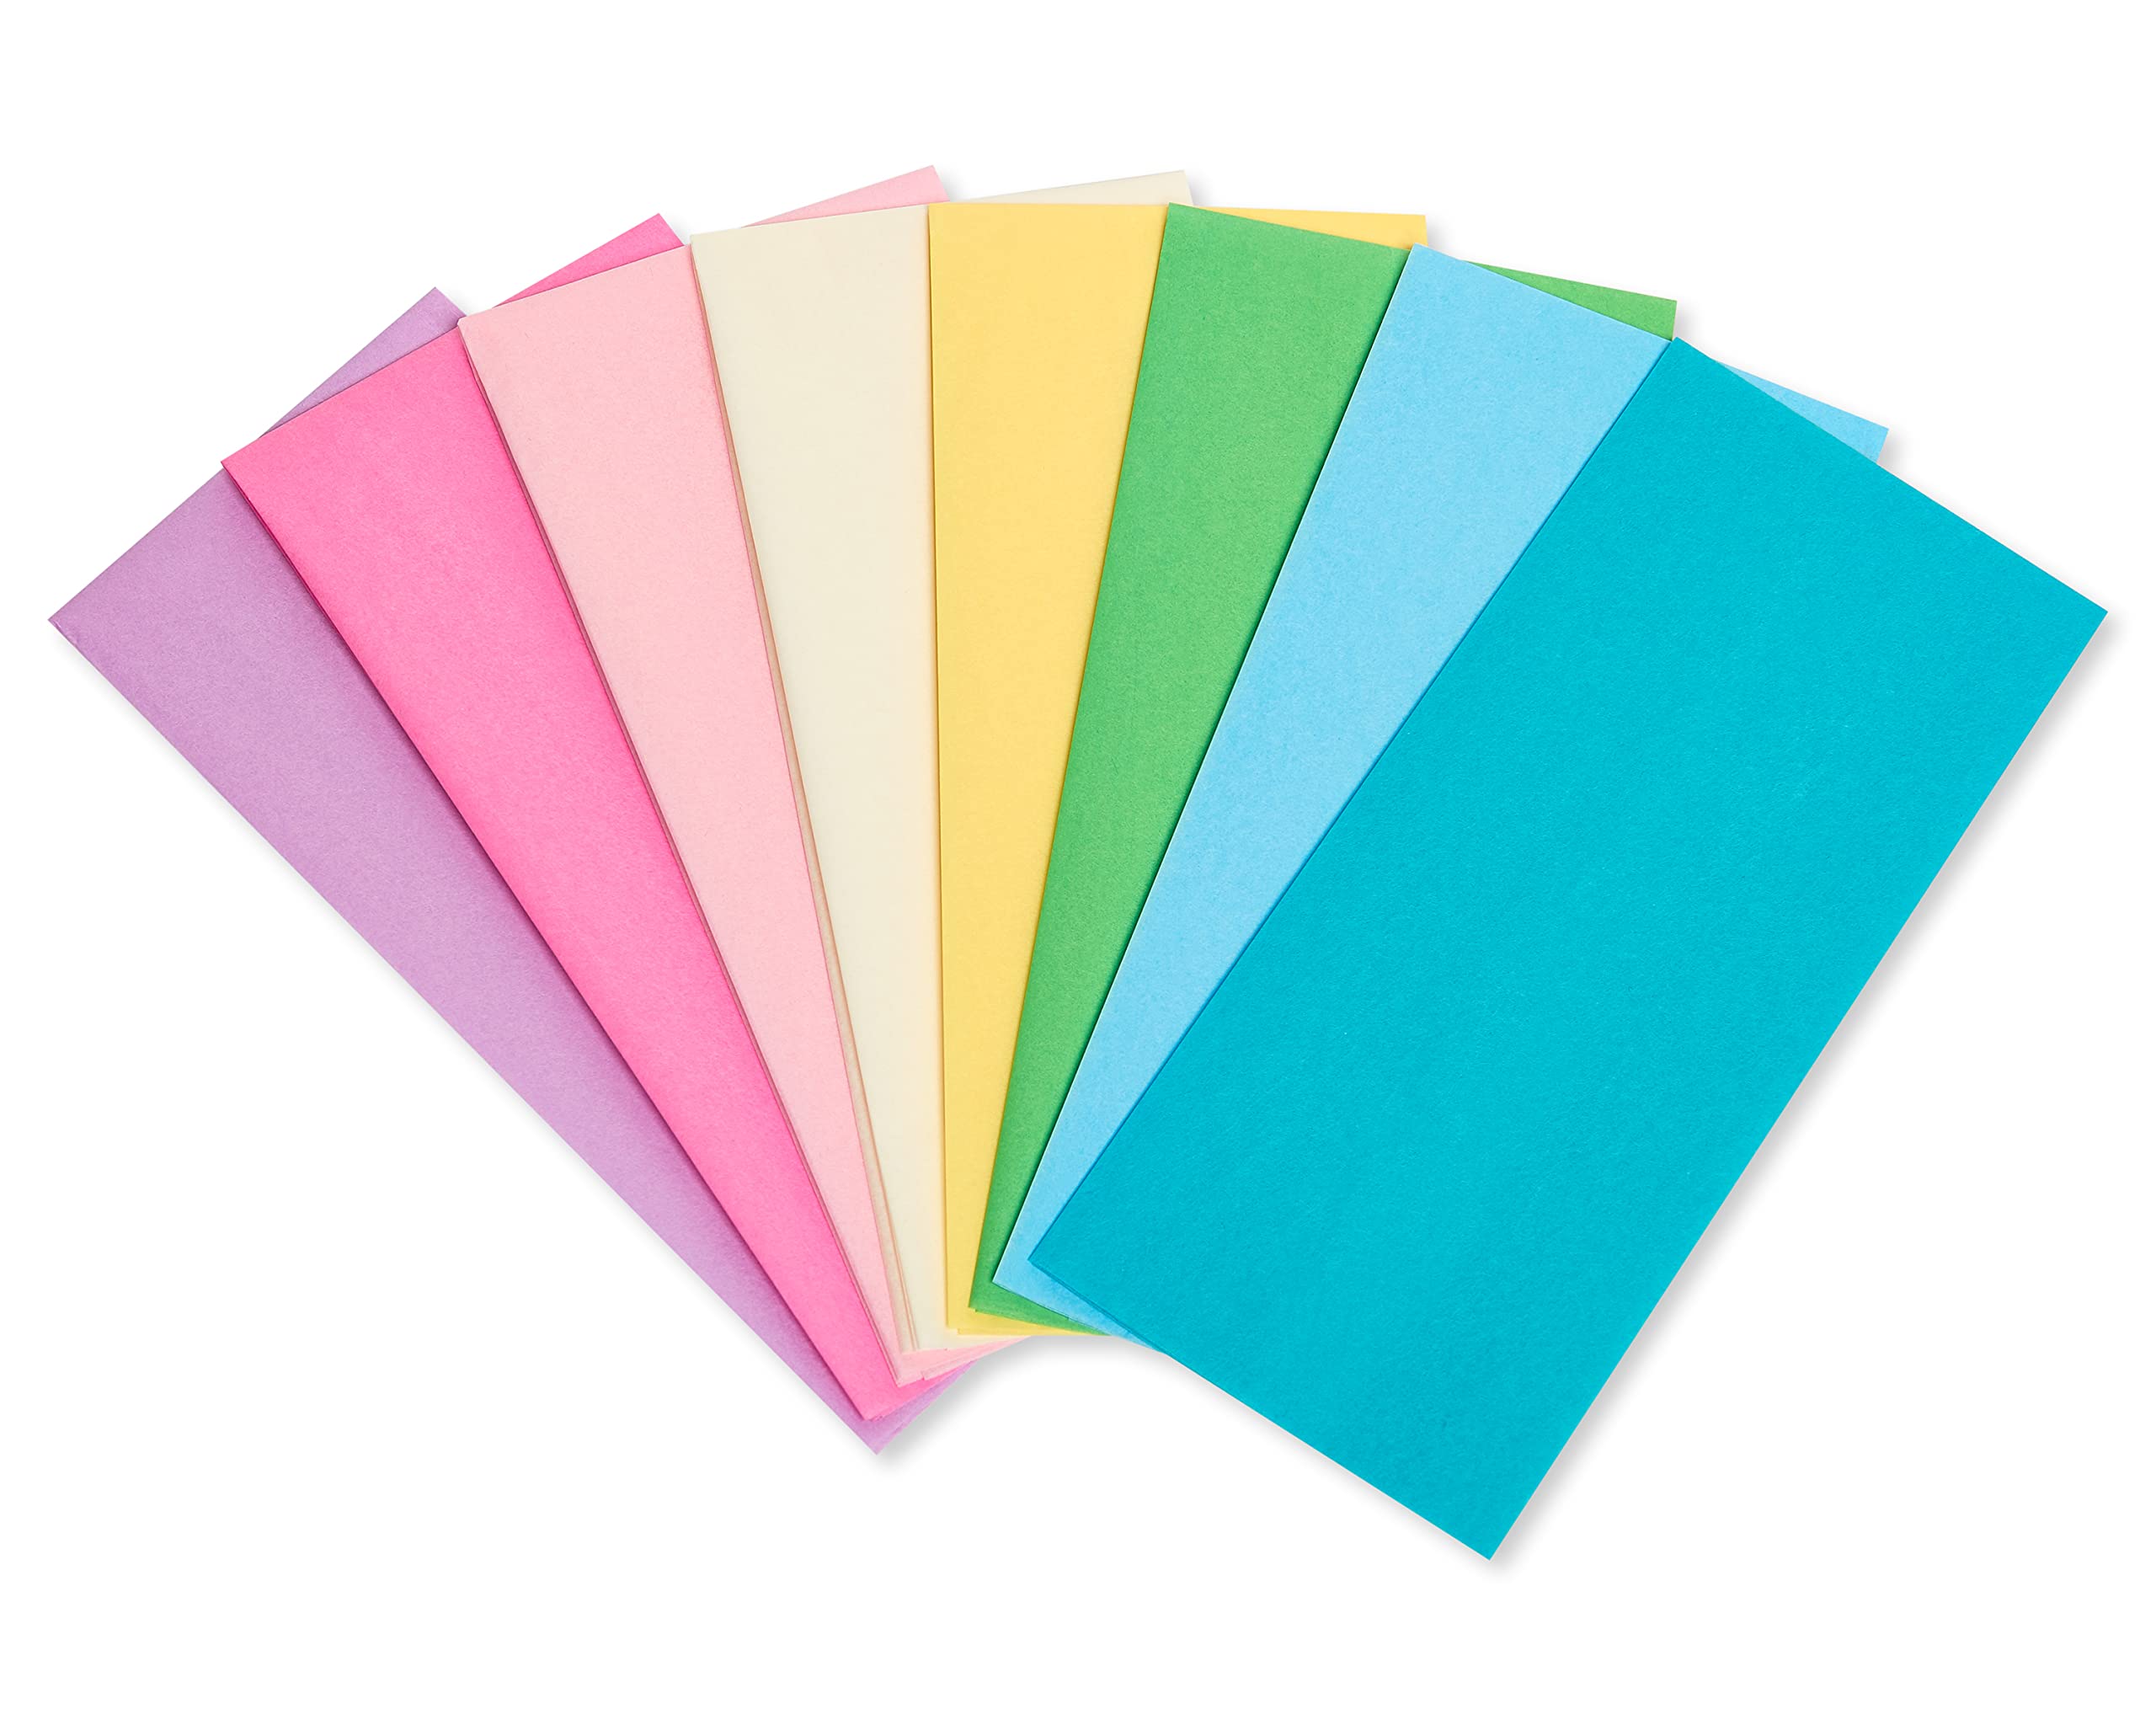 American Greetings Pastel Tissue Paper for Birthdays, Easter, Mother's Day, Father's Day, Graduation and All Occasions (40-Sheets)